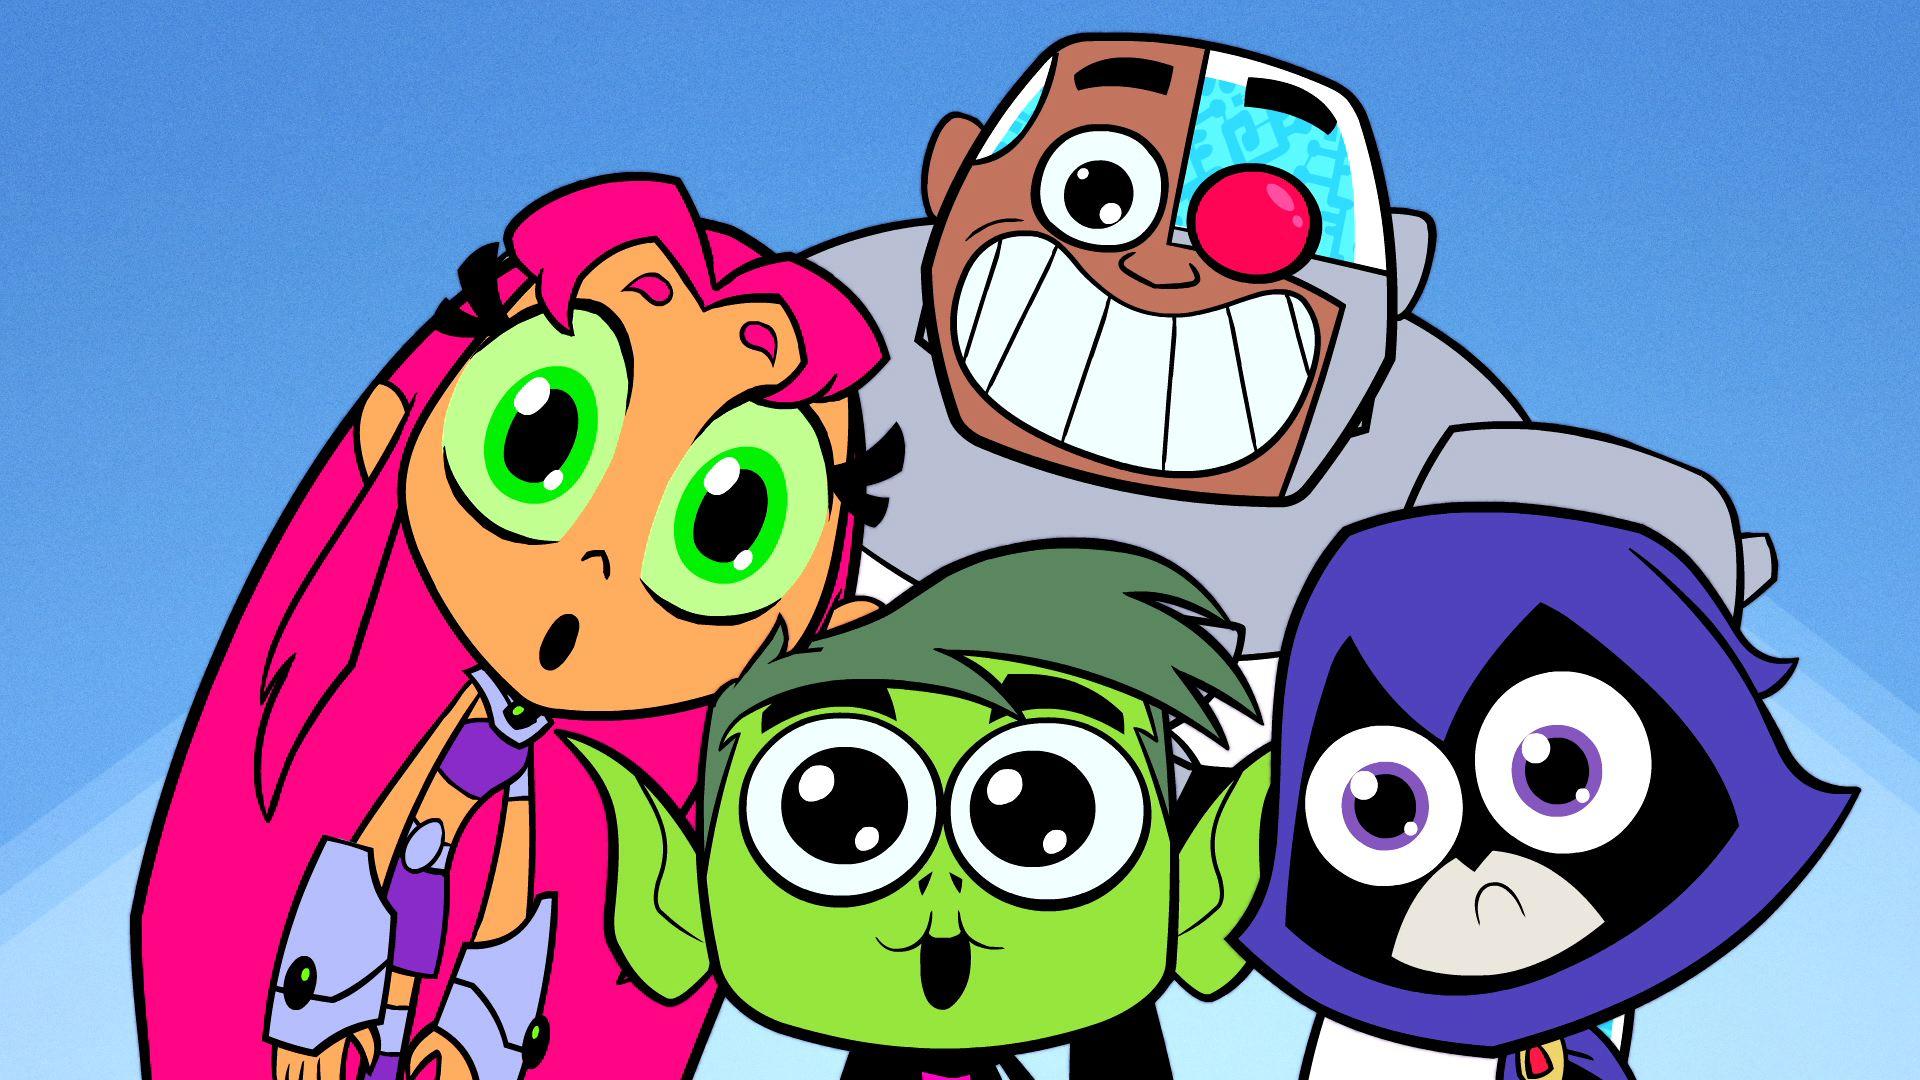 Wallpaper.wiki Teen Titans Go Background HD PIC WPE003888